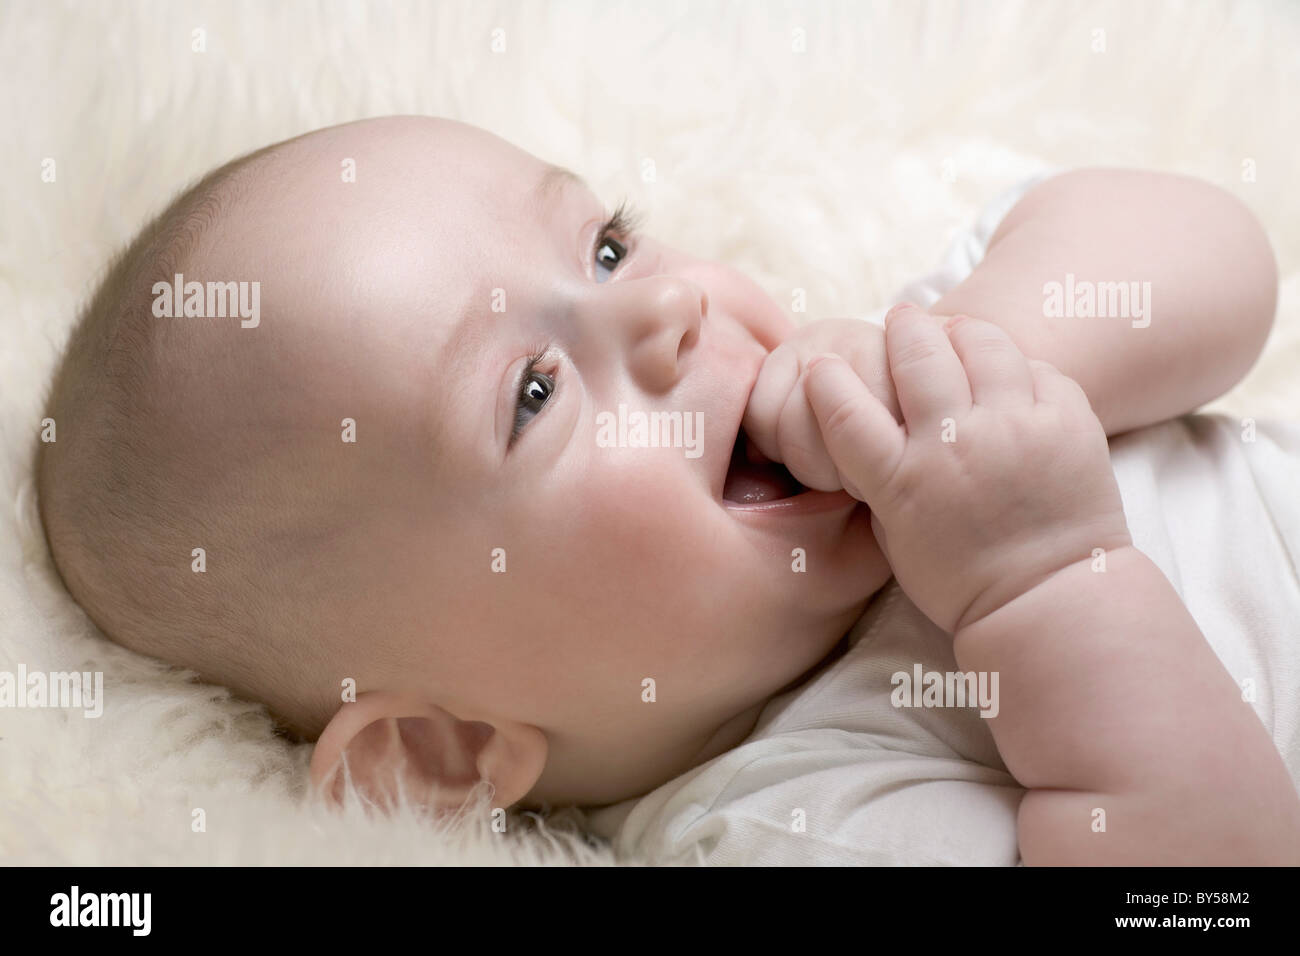 A cheerful baby with his hand in his mouth Stock Photo